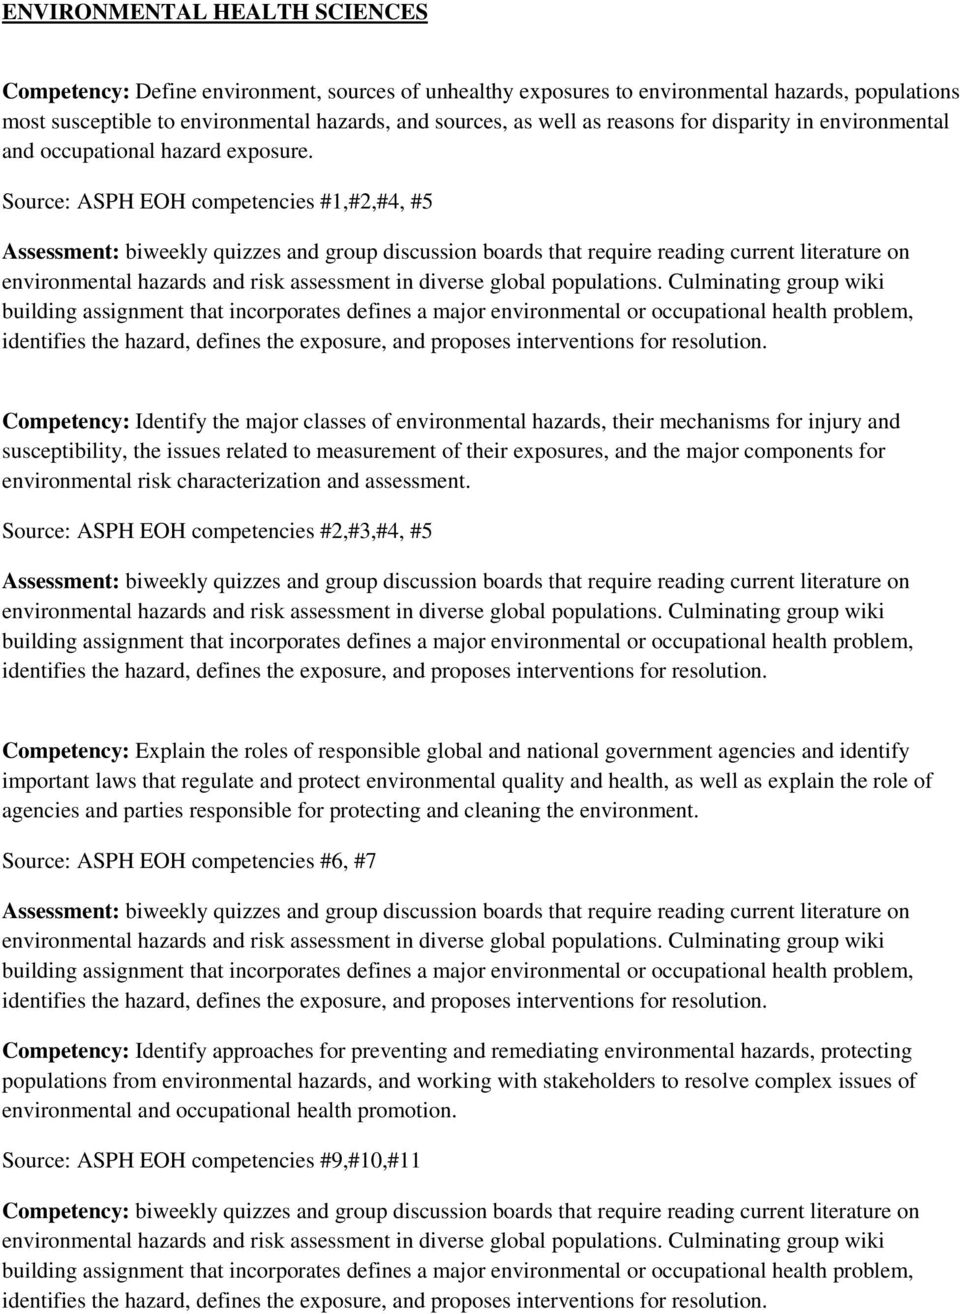 Source: ASPH EOH competencies #1,#2,#4, #5 biweekly quizzes and group discussion boards that require reading current literature on environmental hazards and risk assessment in diverse global